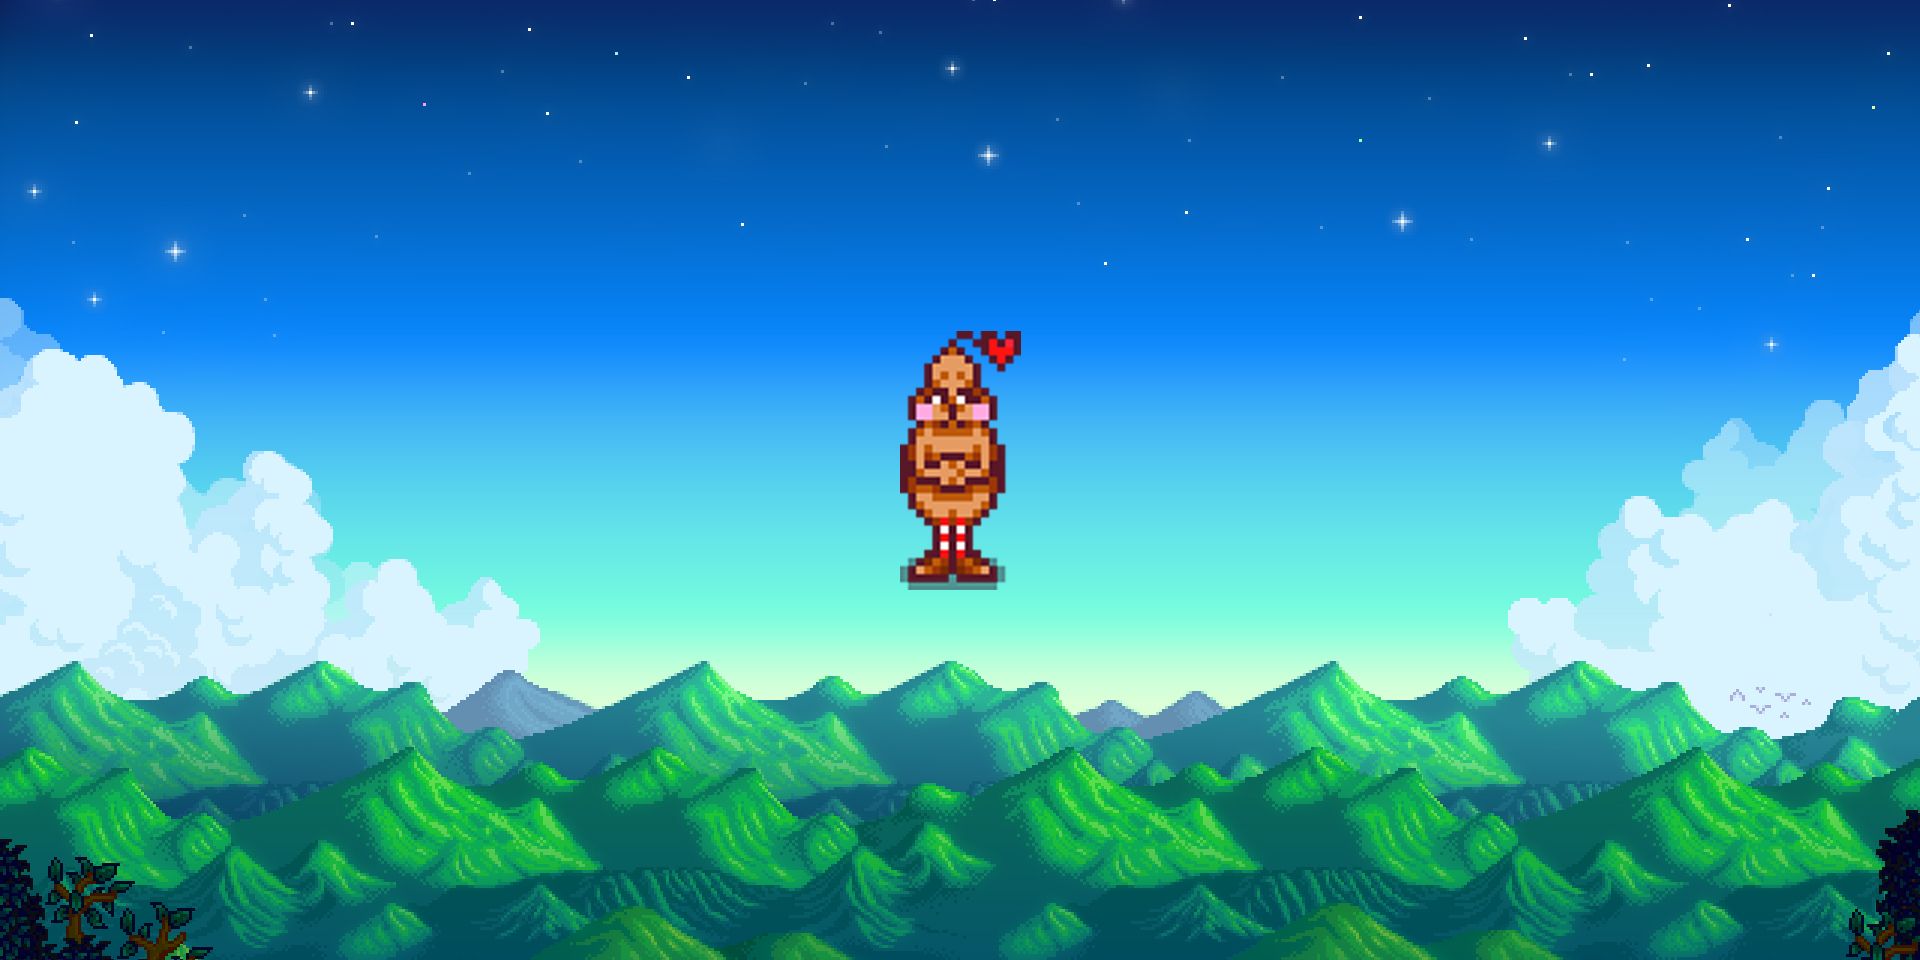 Stardew Valley pink lemon statue on a mountain background